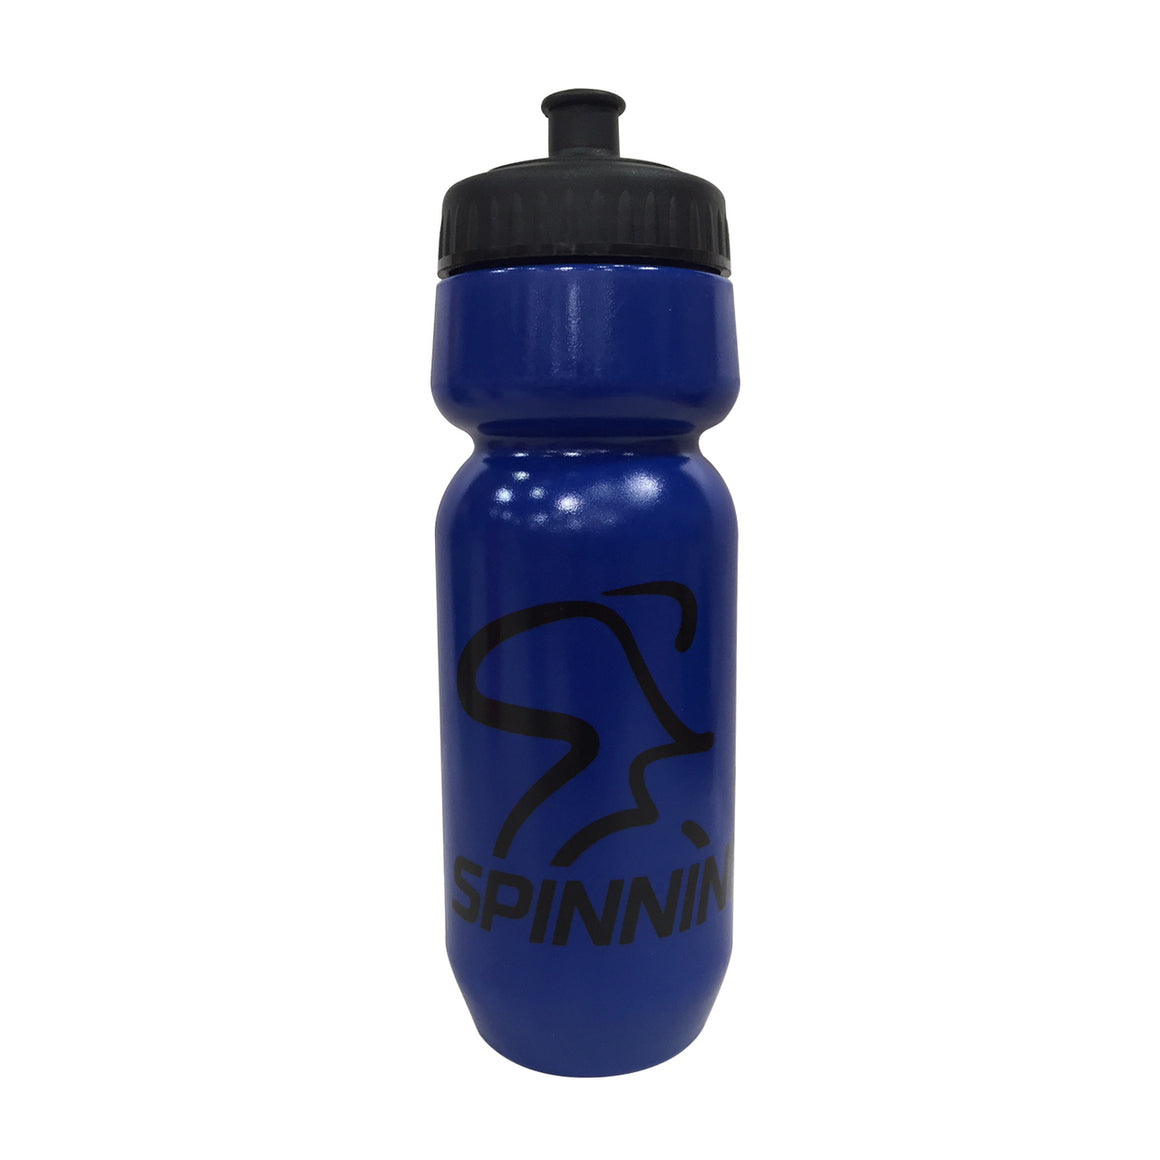 Spinning® Water Bottle-Blue - Indoor Cyclery